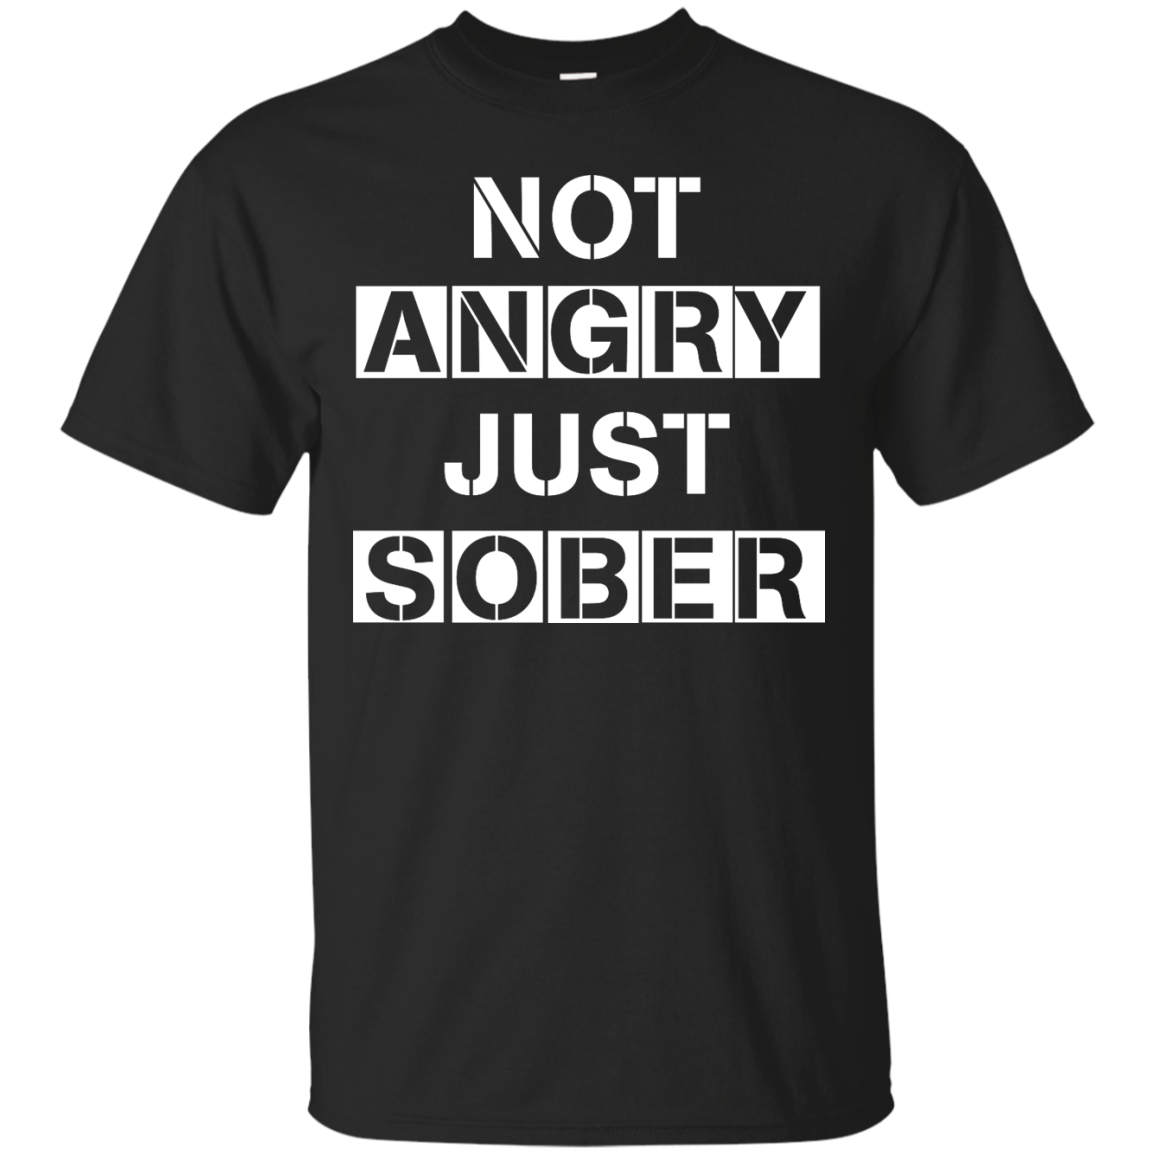 Not Angry Just Sober shirt, tank, sweater